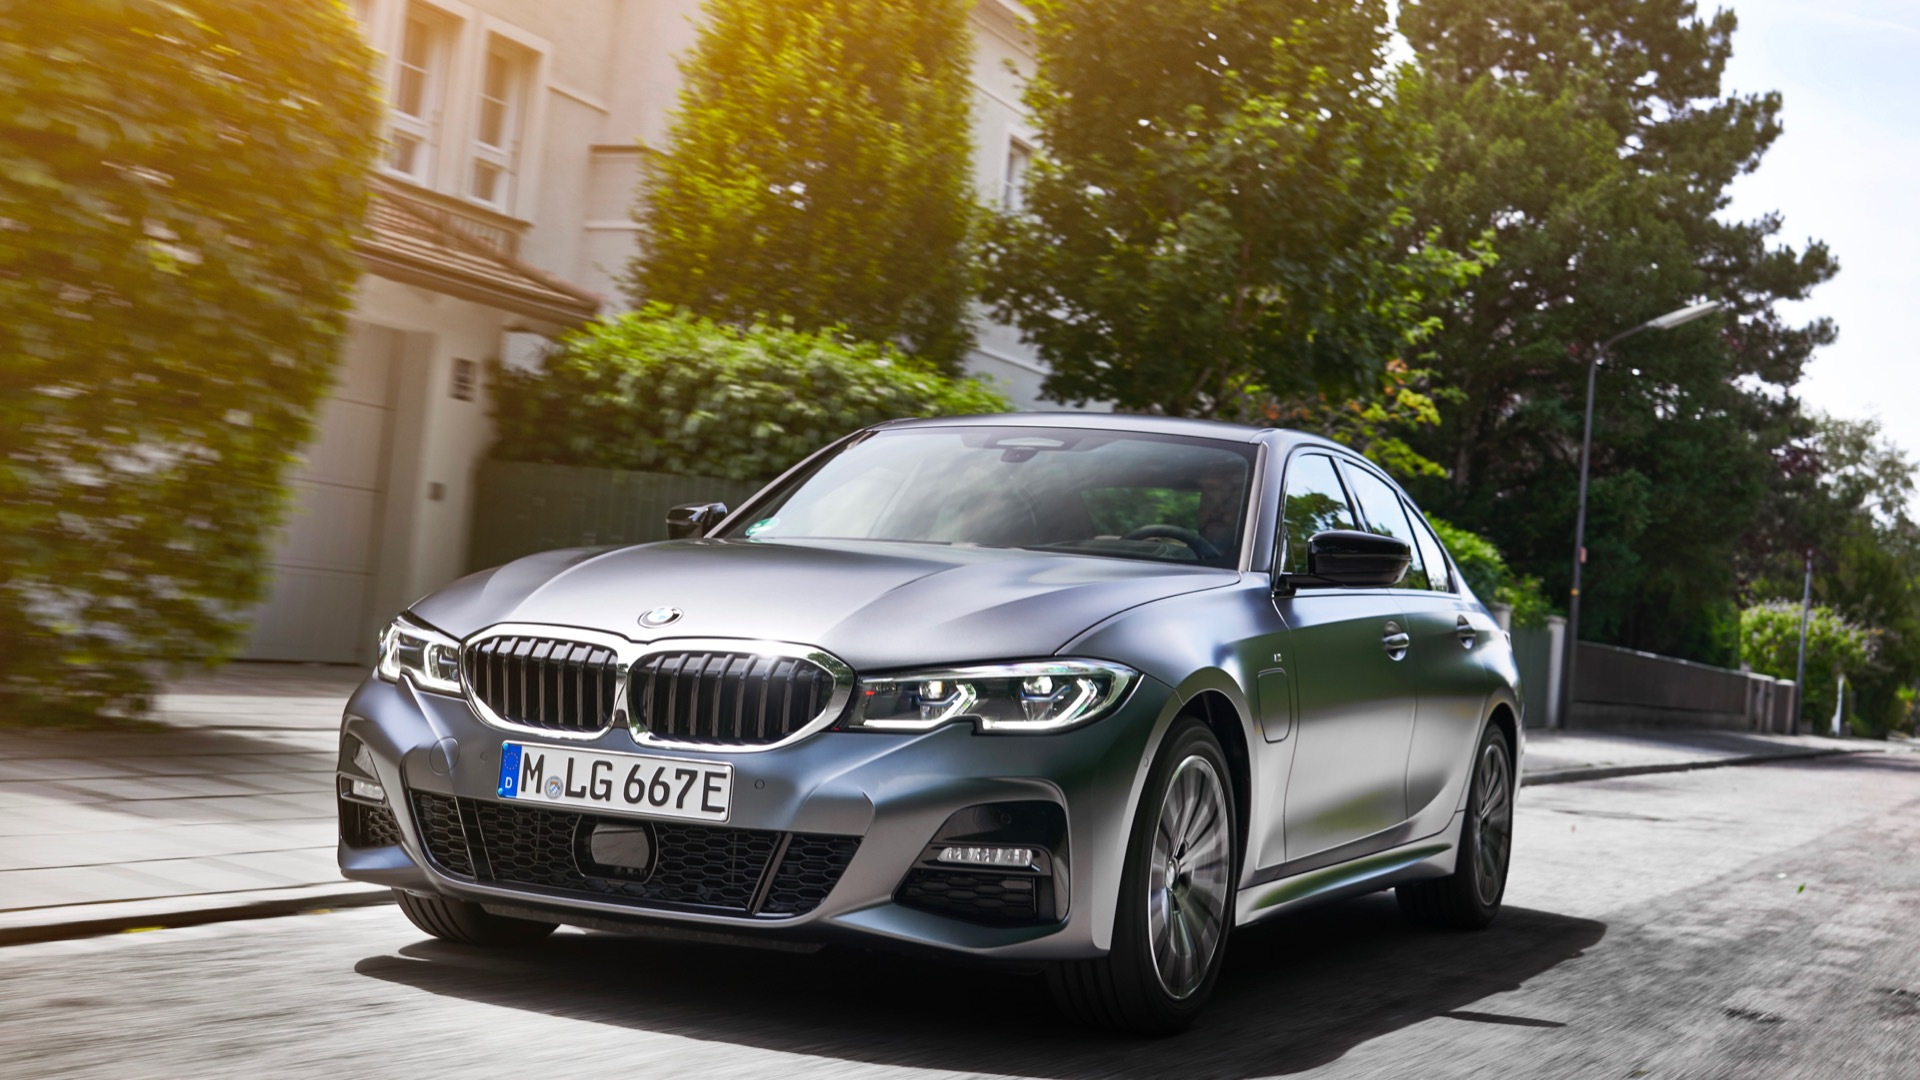 2021 BMW 3-Series plug-in hybrid gets electric range, new home-charging options